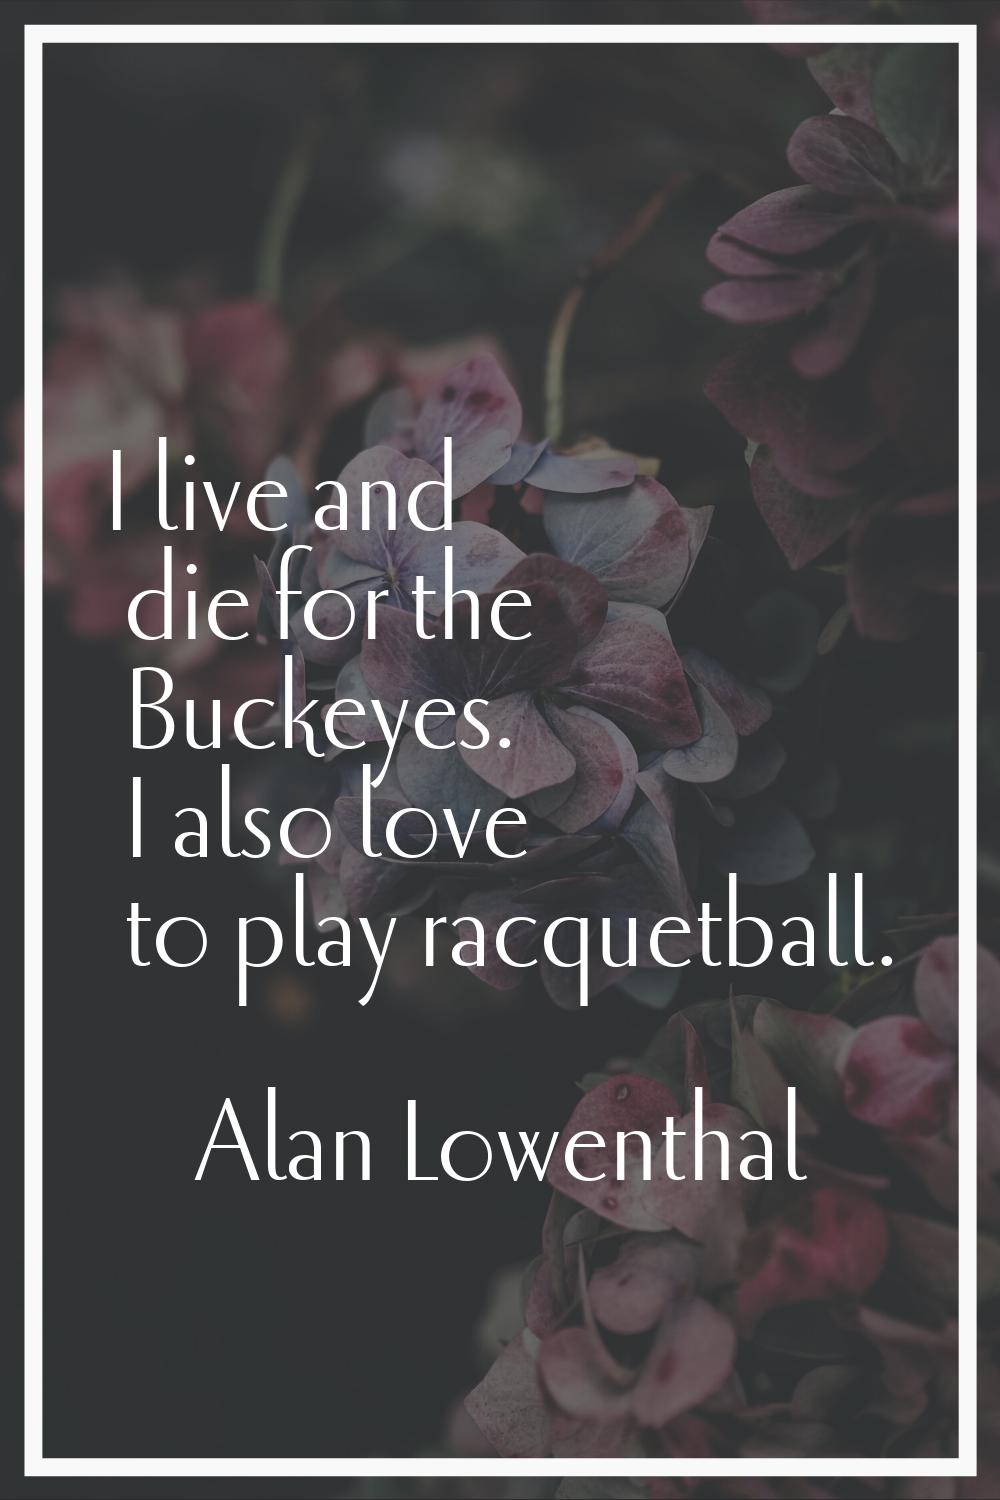 I live and die for the Buckeyes. I also love to play racquetball.